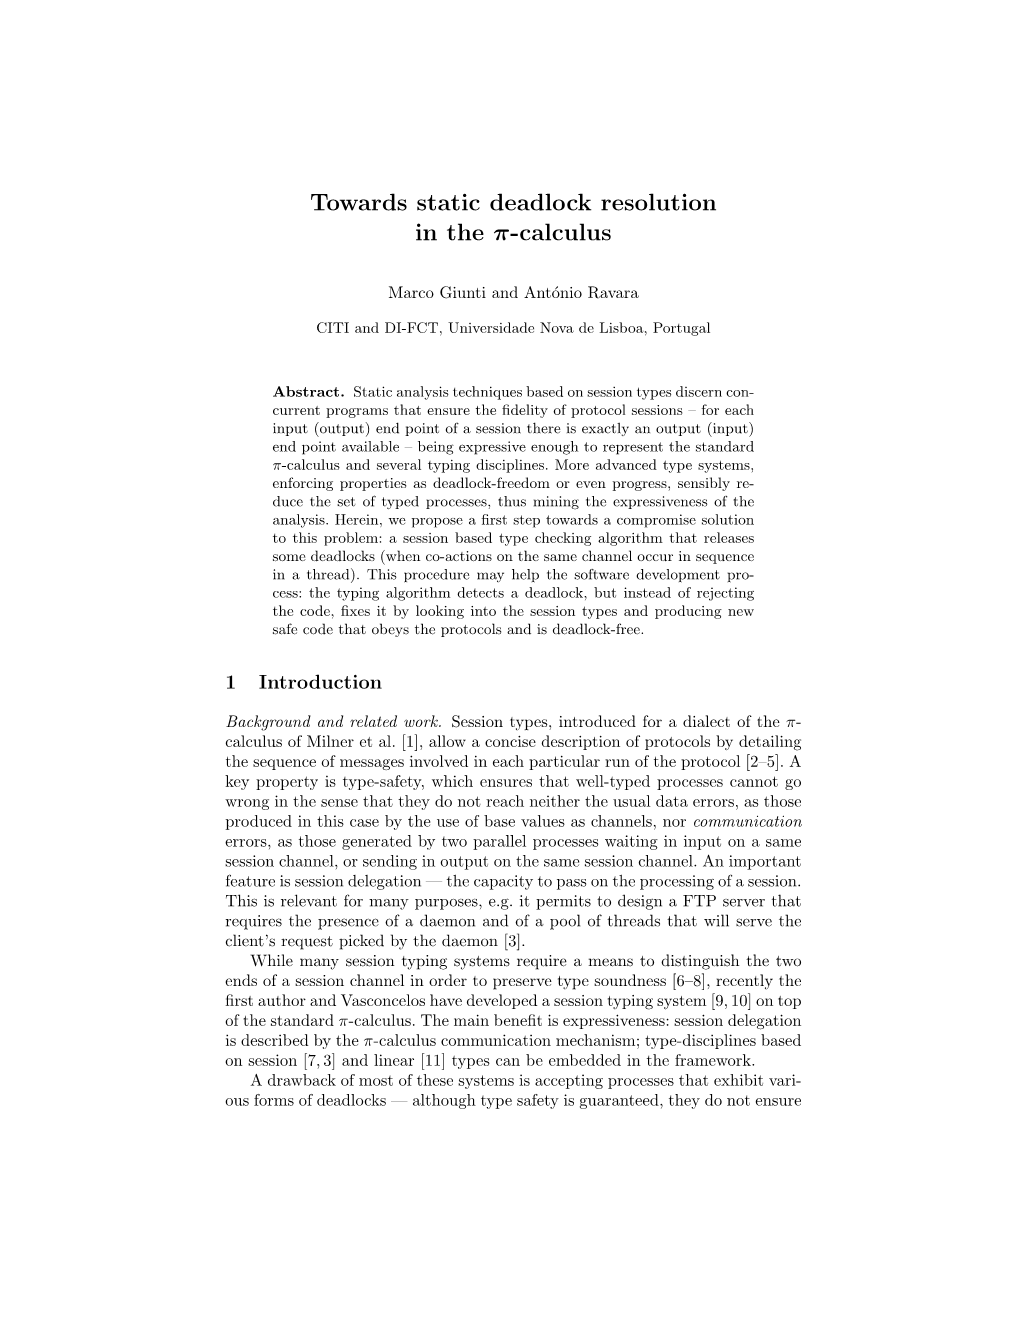 Towards Static Deadlock Resolution in the Π-Calculus